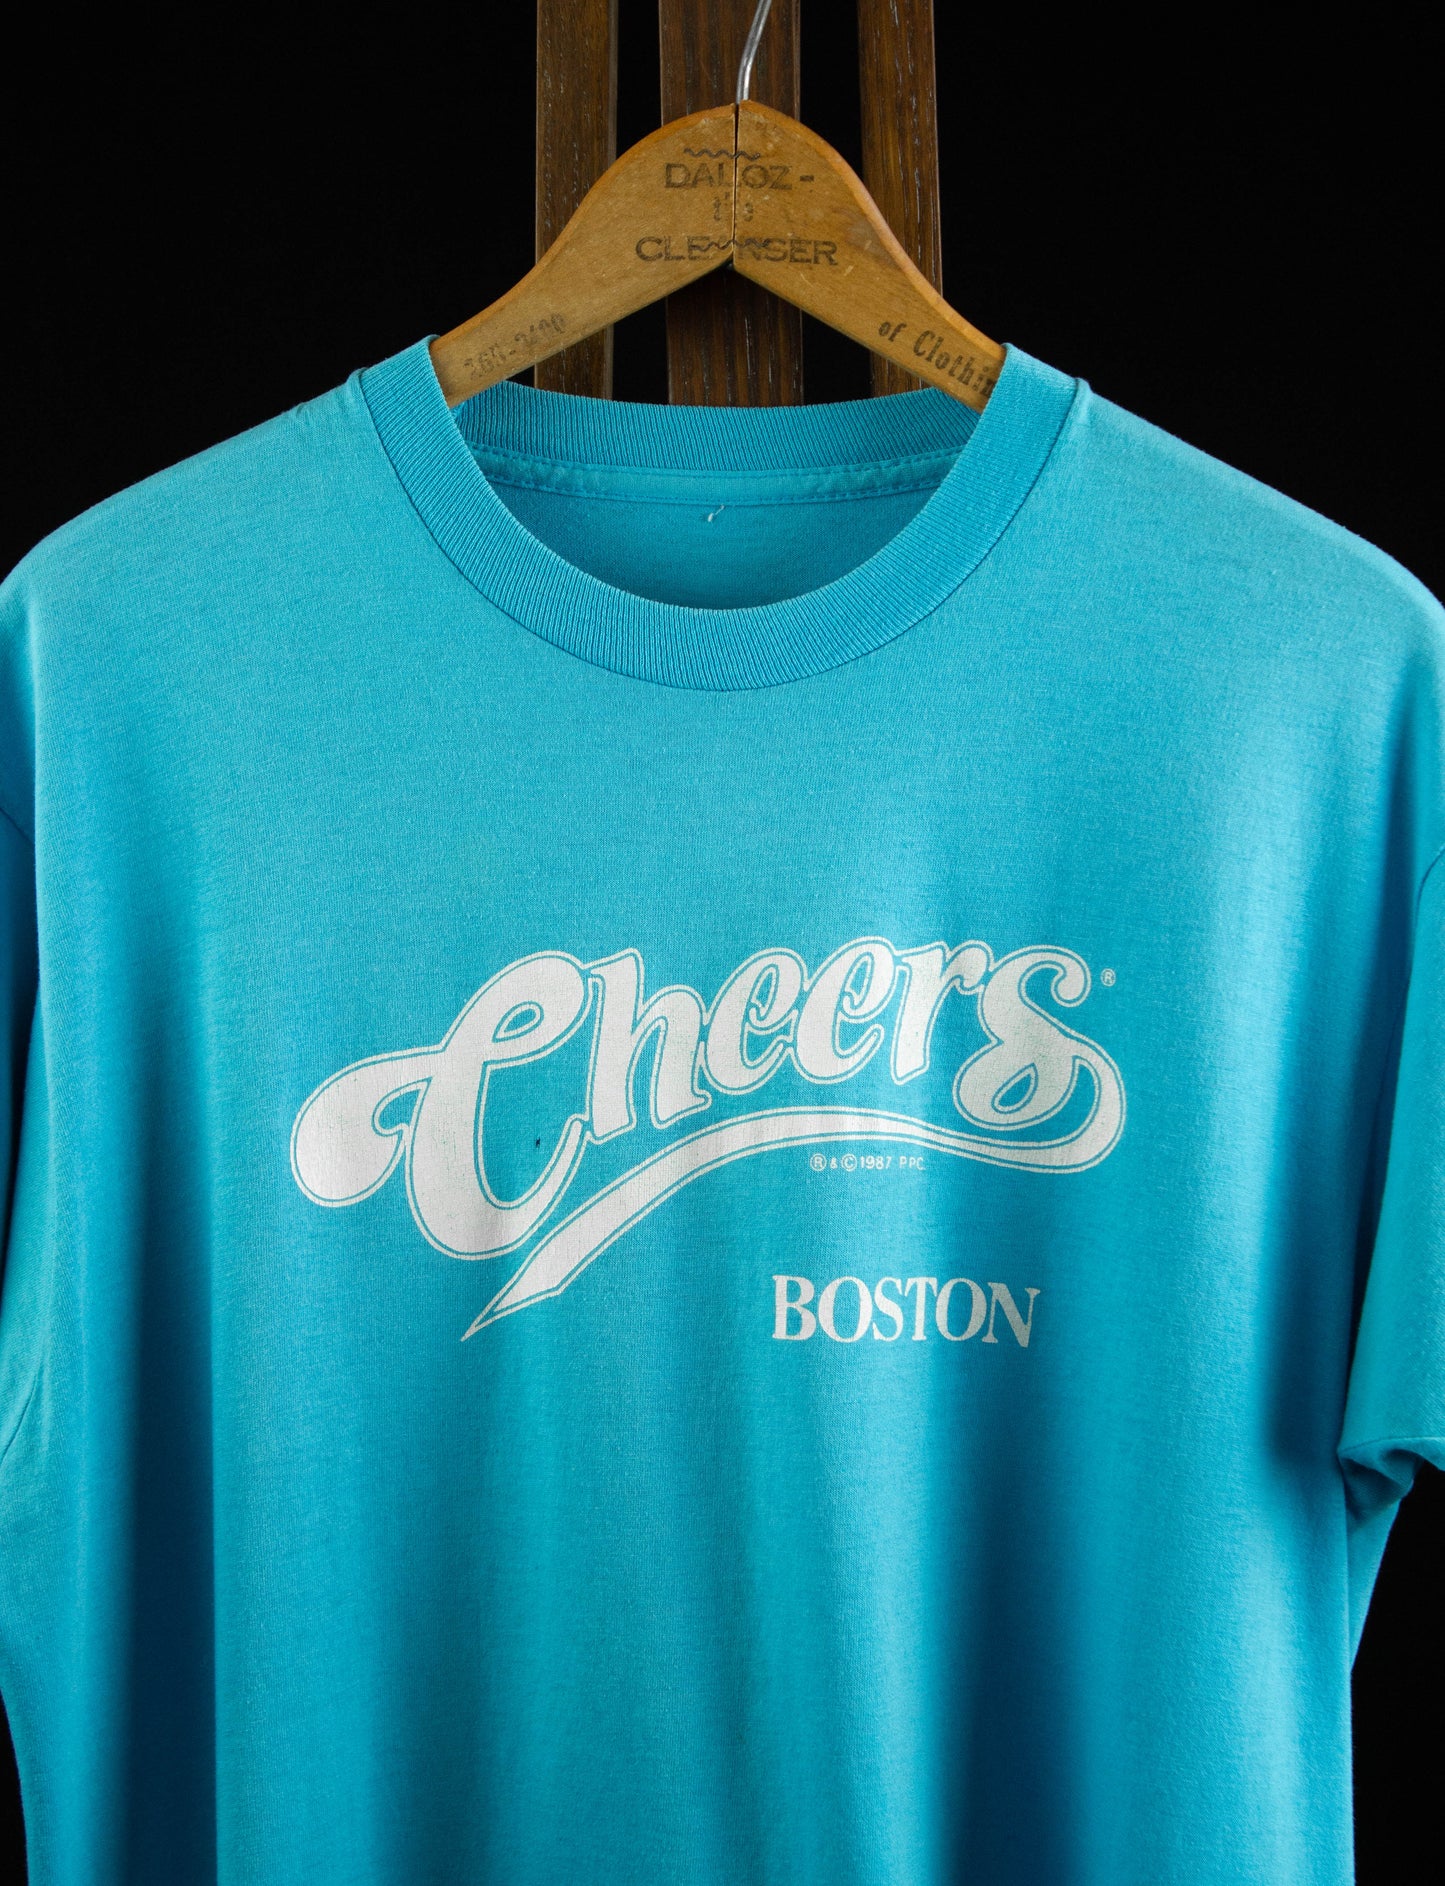 Vintage Cheers Boston Graphic T Shirt 1987 TV Show Bar Light Blue and White Large